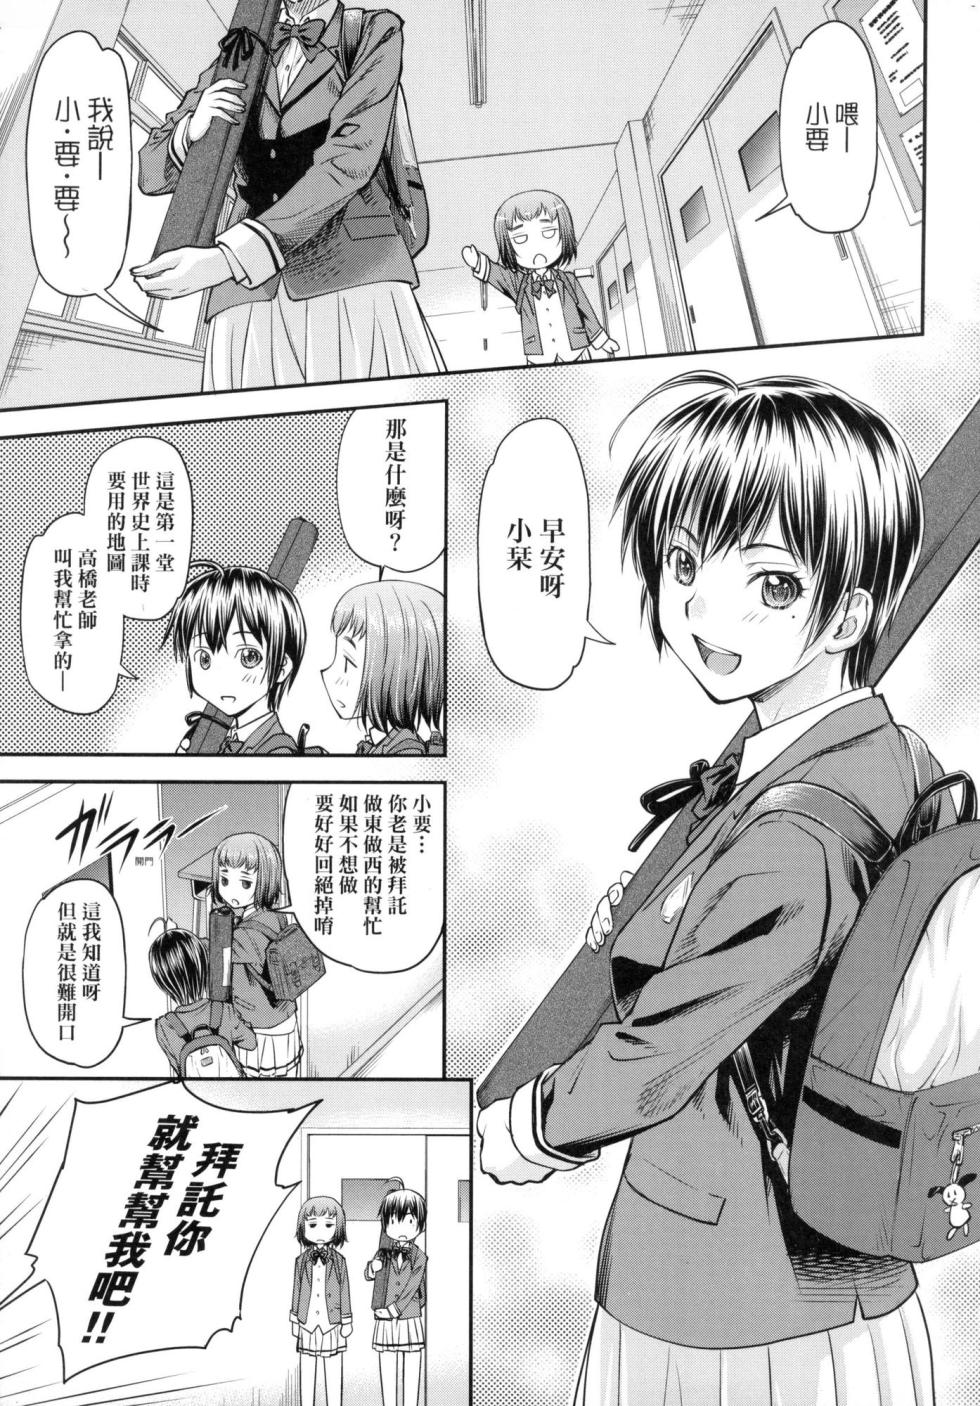 [Nagare Ippon] Kaname Date Jou | 小要開發Date 上 [Chinese] [Decensored] - Page 11